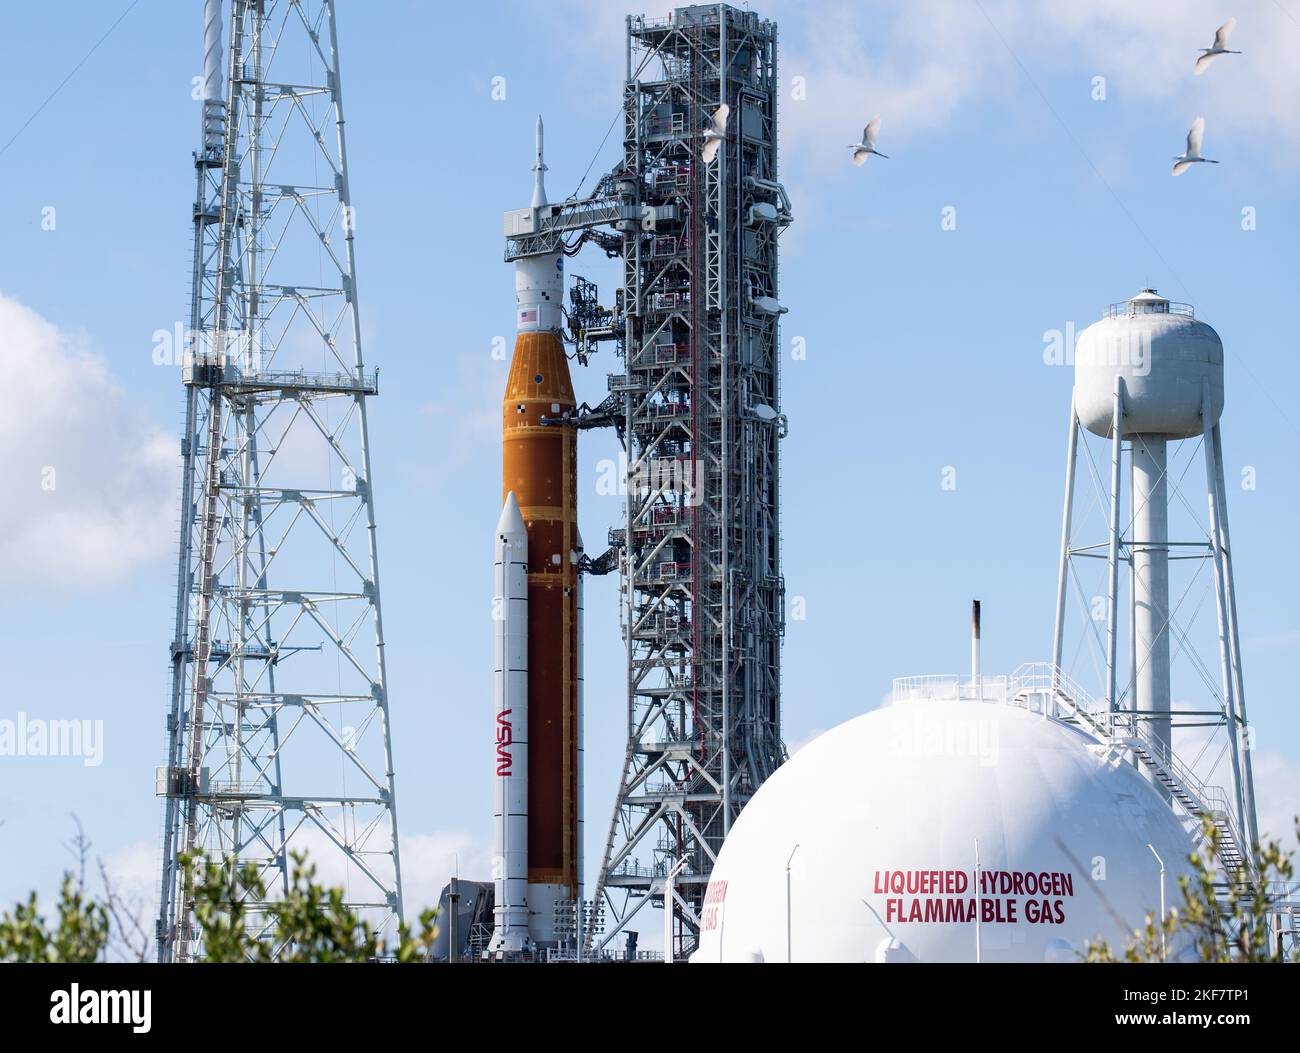 Cape Canaveral, Florida, USA. 16th Nov, 2022. NASA's Space Launch System (SLS) rocket with the Orion spacecraft aboard is seen atop the mobile launcher at Launch Pad 39B, Friday, Nov. 11, 2022, at NASA's Kennedy Space Center in Florida. Teams began walkdowns and inspections at the pad to assess the status of the rocket and spacecraft after the passage of Hurricane Nicole. NASA's Artemis I flight test is the first integrated test of the agency's deep space exploration systems: the Orion spacecraft, SLS rocket, and supporting ground systems. Launch of the uncrewed flight test is targeted for Stock Photo